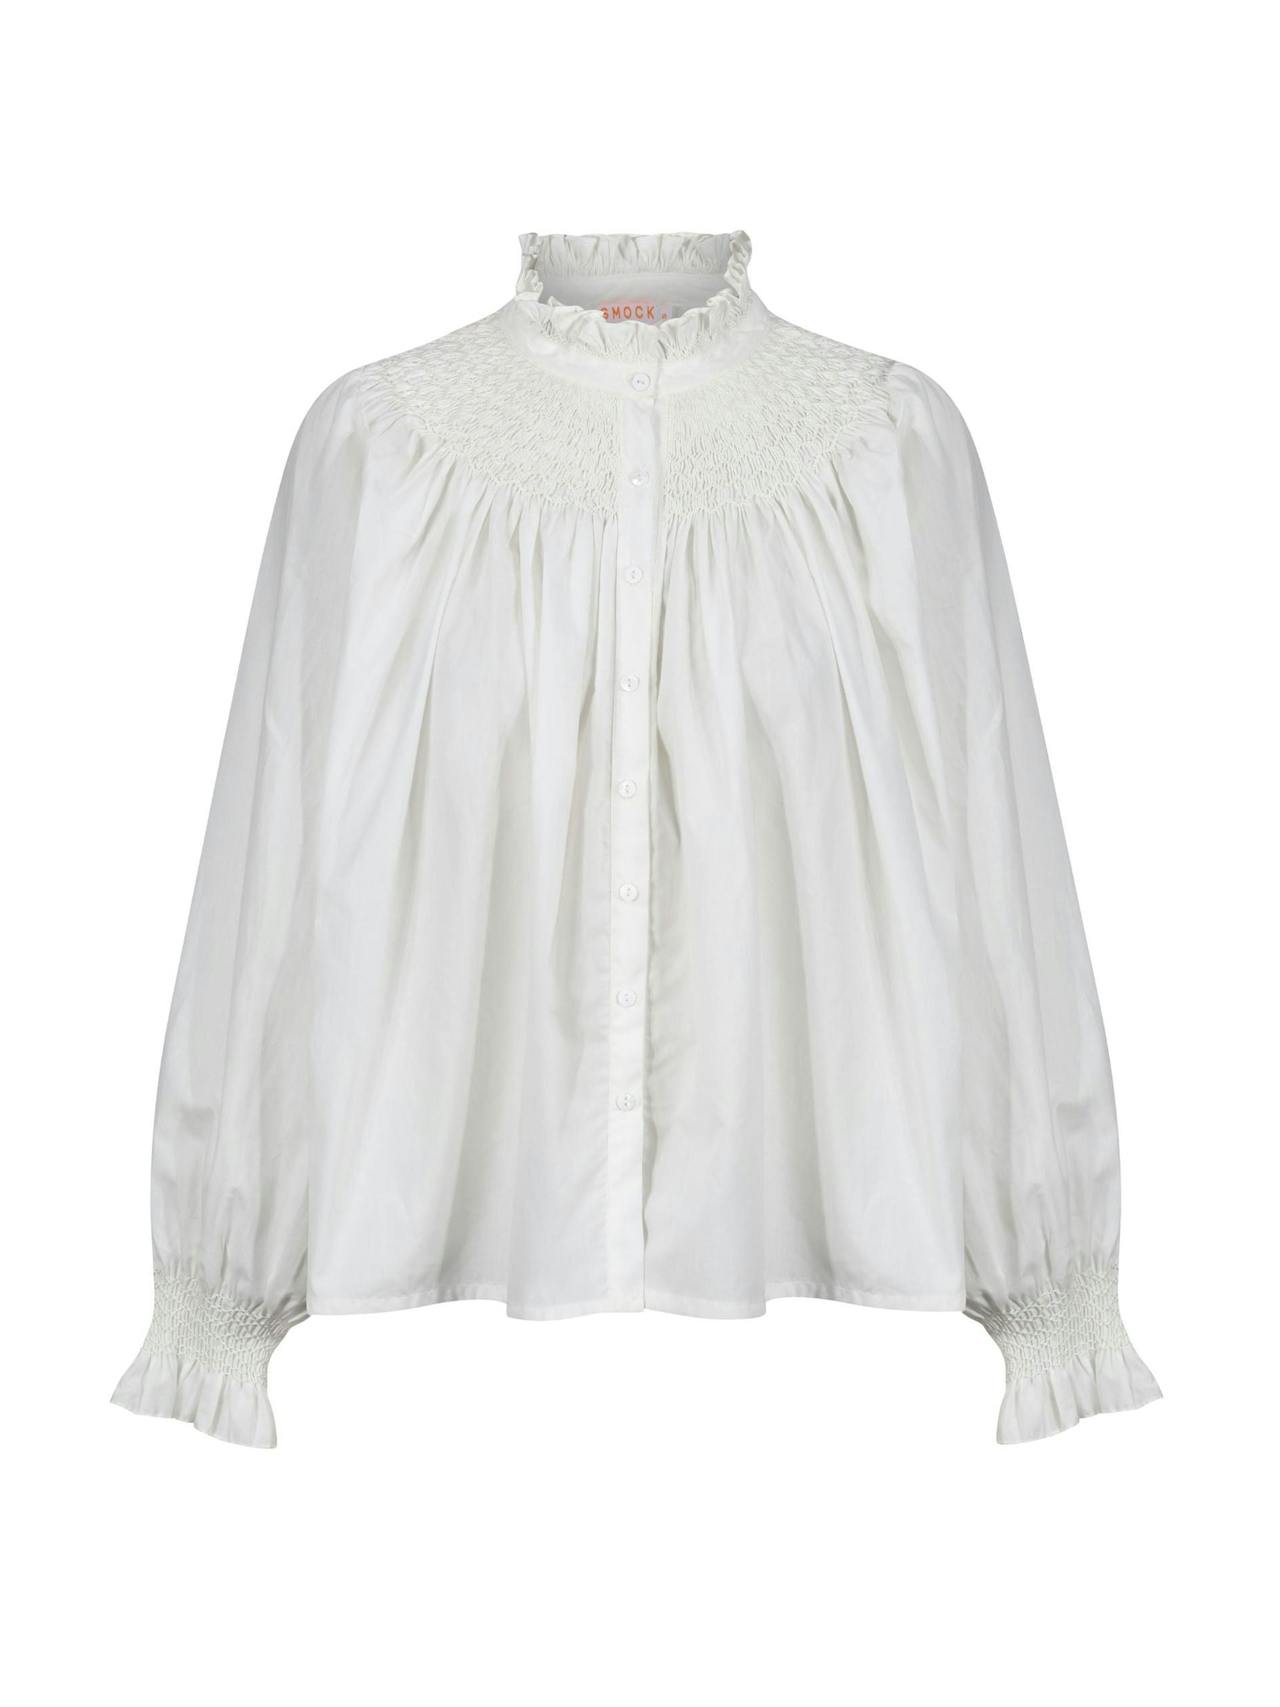 Scholl hand-smocked white blouse with pearl embellishment